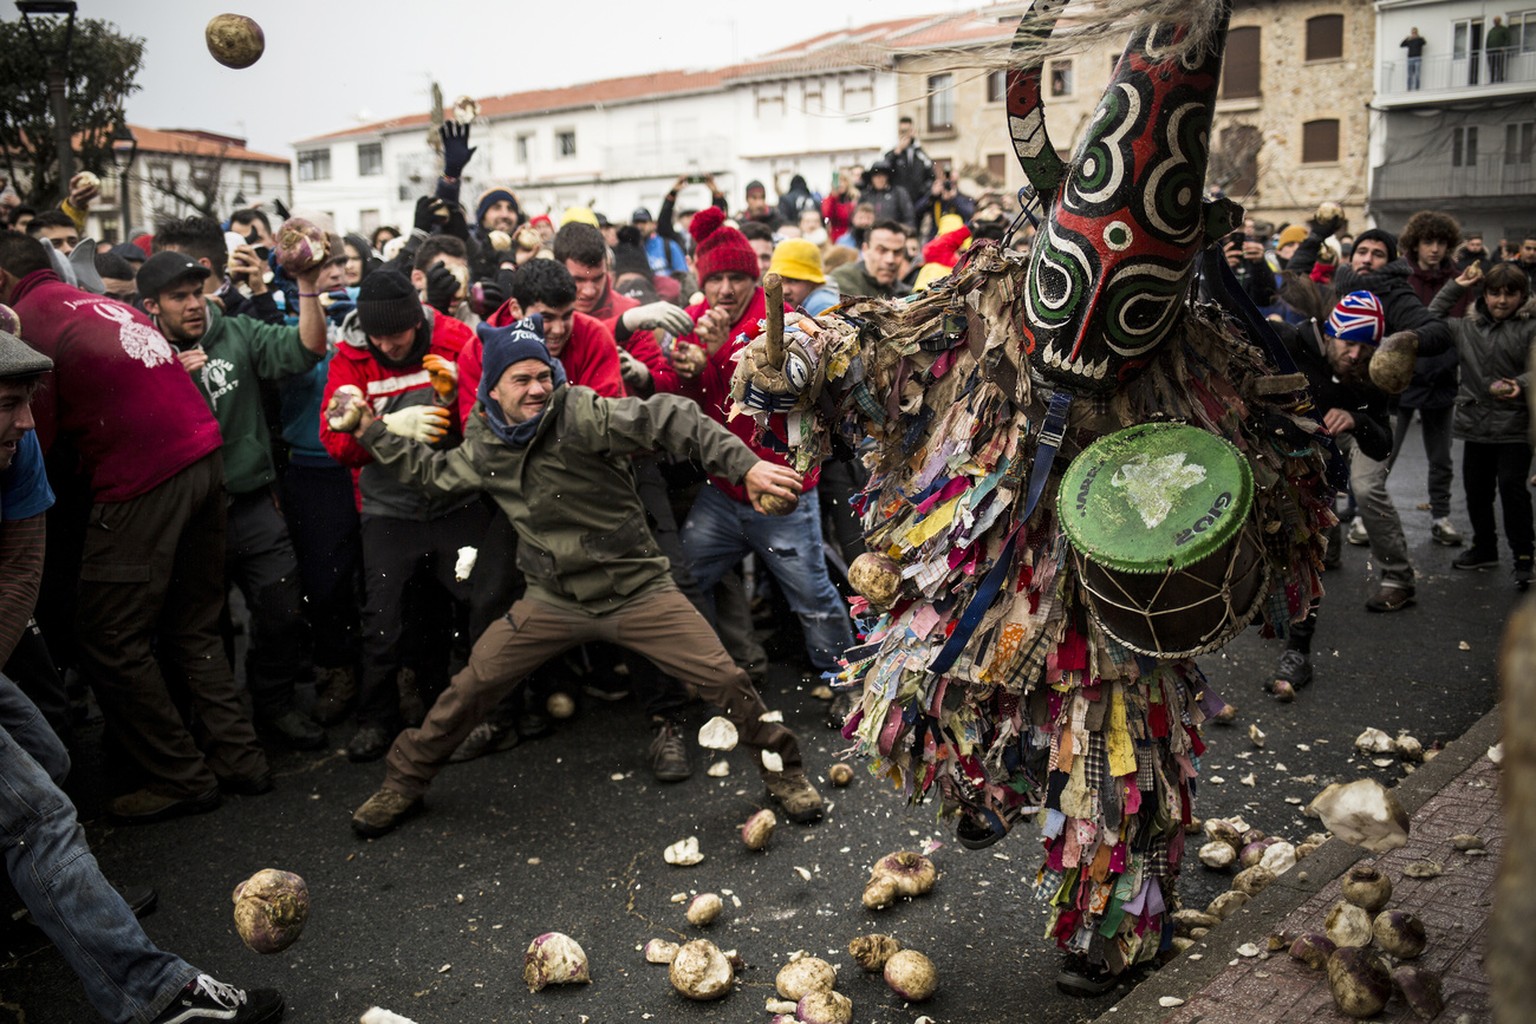 In this Saturday, Jan. 19, 2019 photo, people throw turnips at the Jarramplas as he makes his way through the streets beating his drum during the Jarramplas festival in the tiny southwestern Spanish t ...